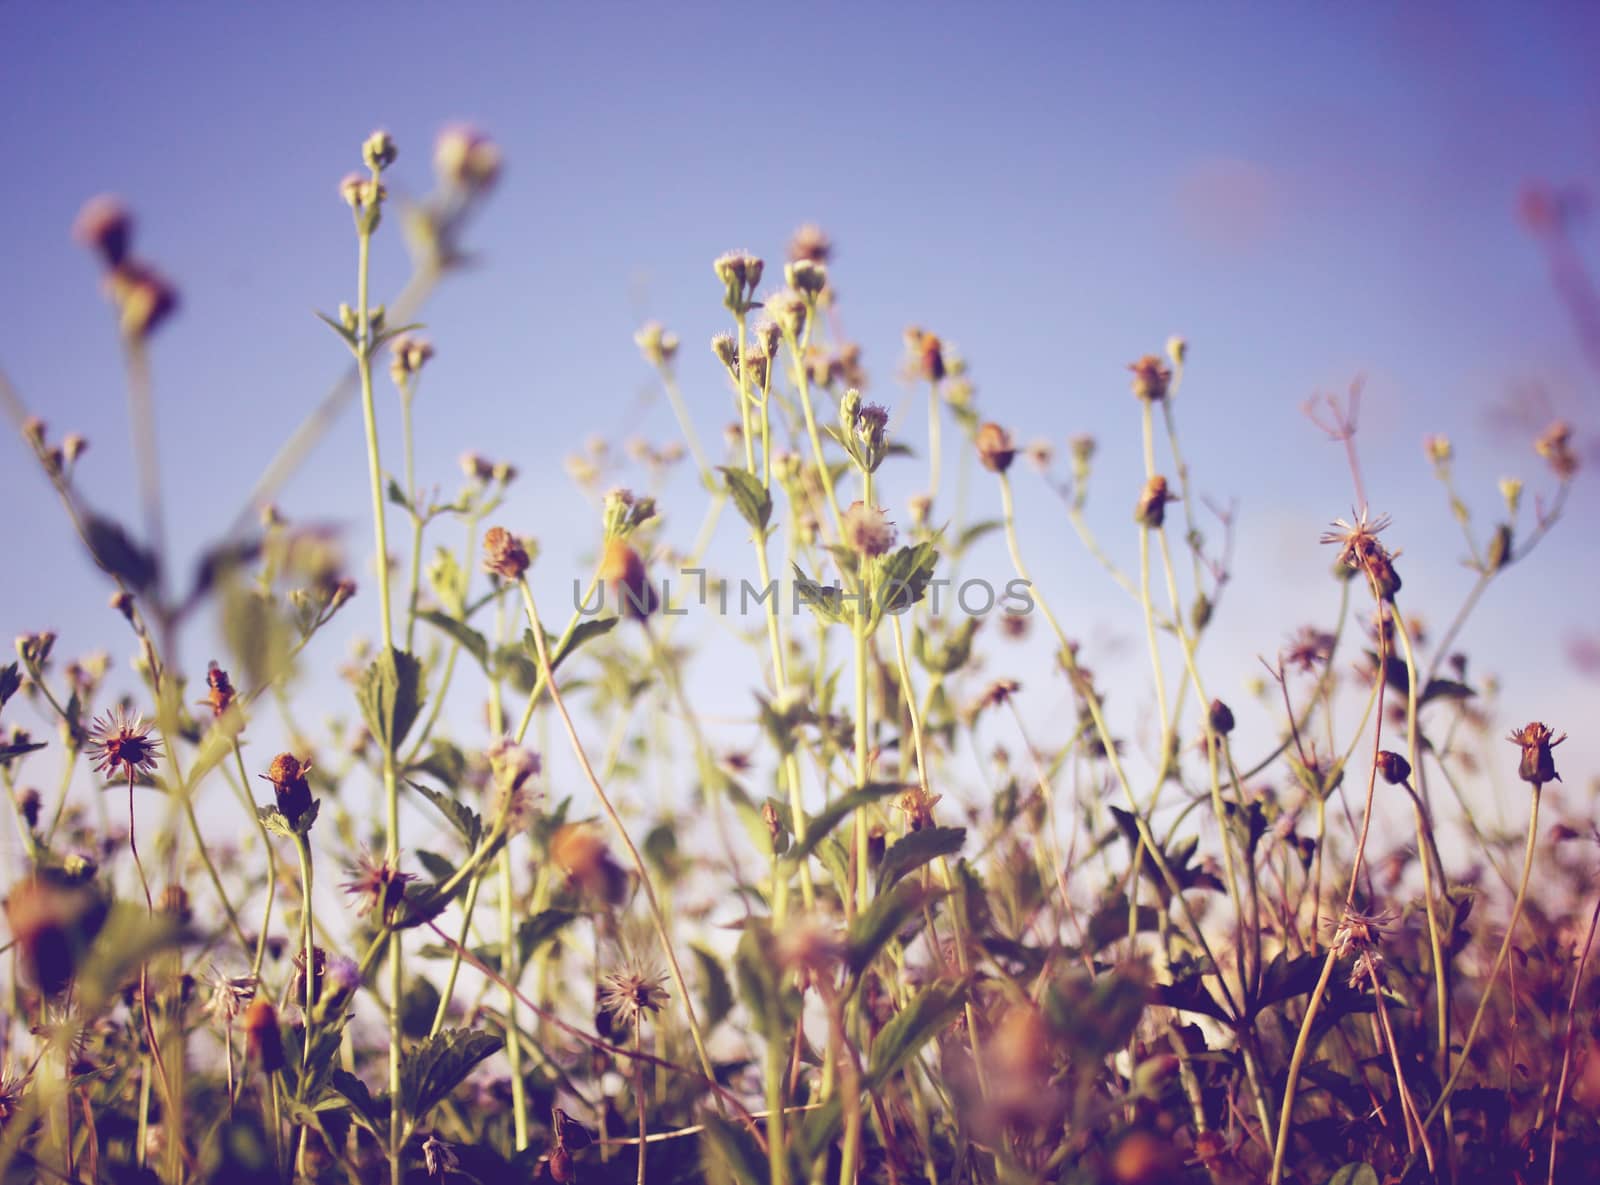 Dry meadow flowers and blue sky with retro filter effect by nuchylee